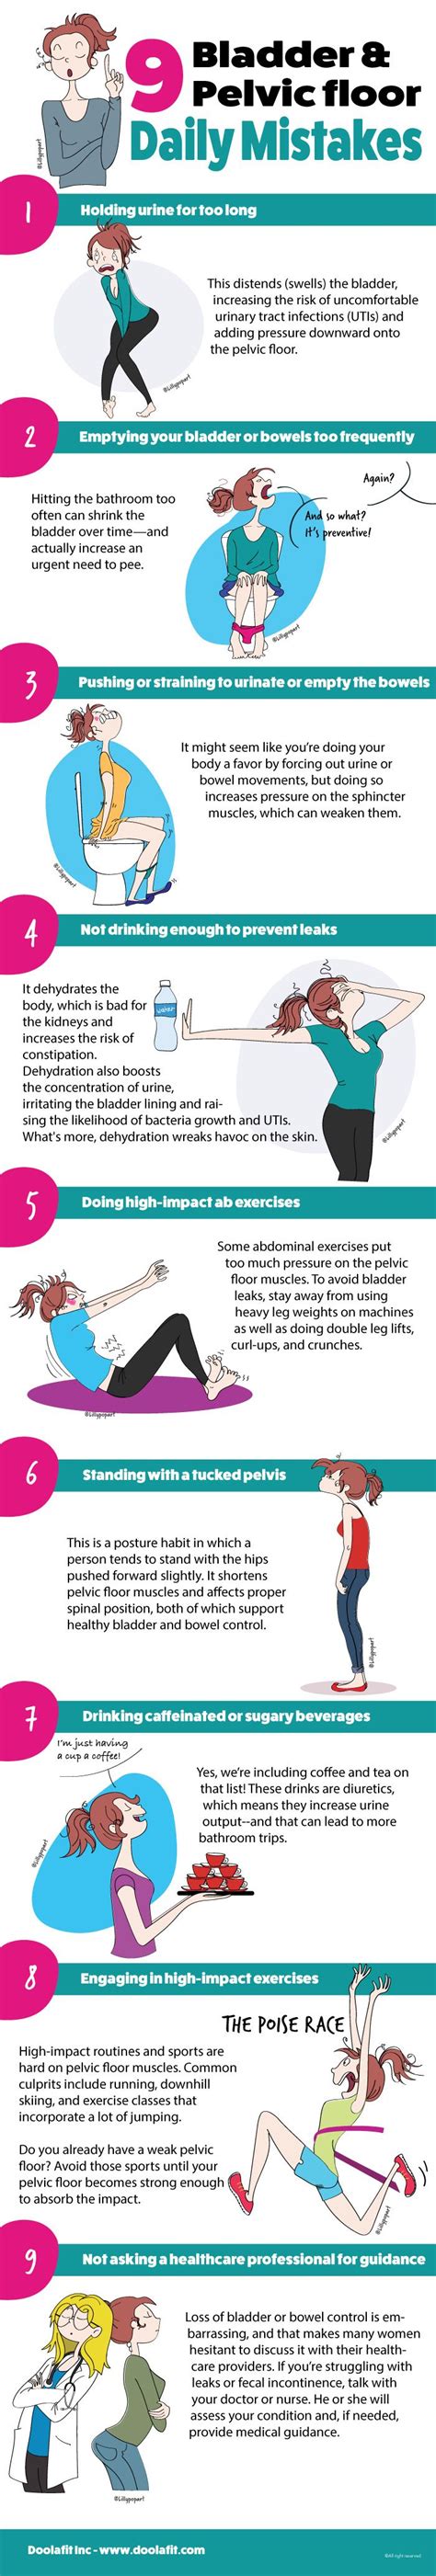 9 Bladder And Pelvic Floor Mistakes You Might Make Daily Pelvic Floor